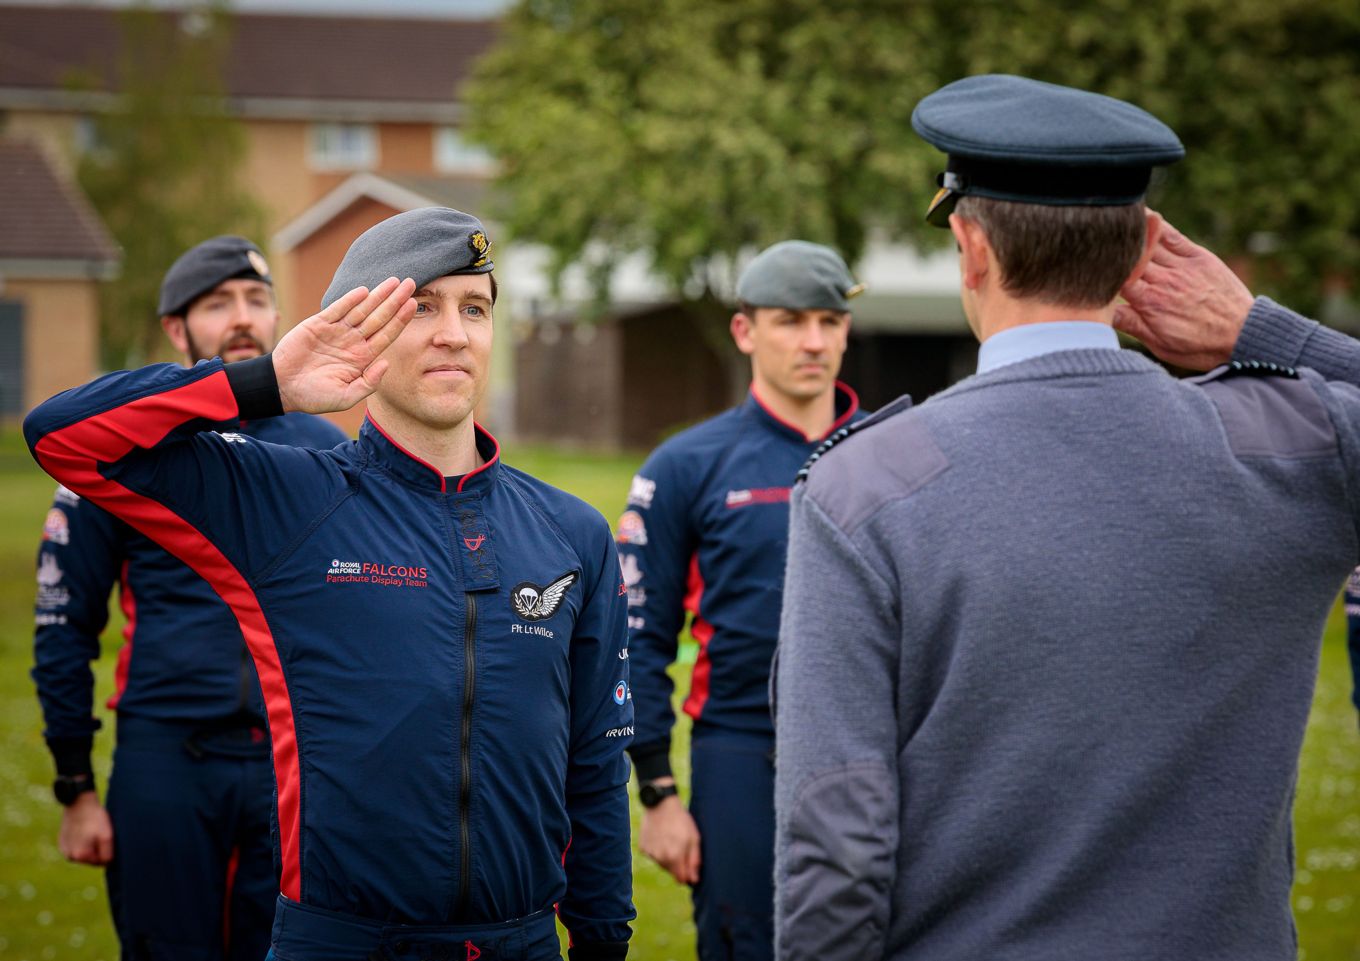 Group Captain Simon Blackwell, Commander Air Wing, receives the salute from Flight Lieutenant Chris Wilce, Officer Commanding RAF Falcons. 